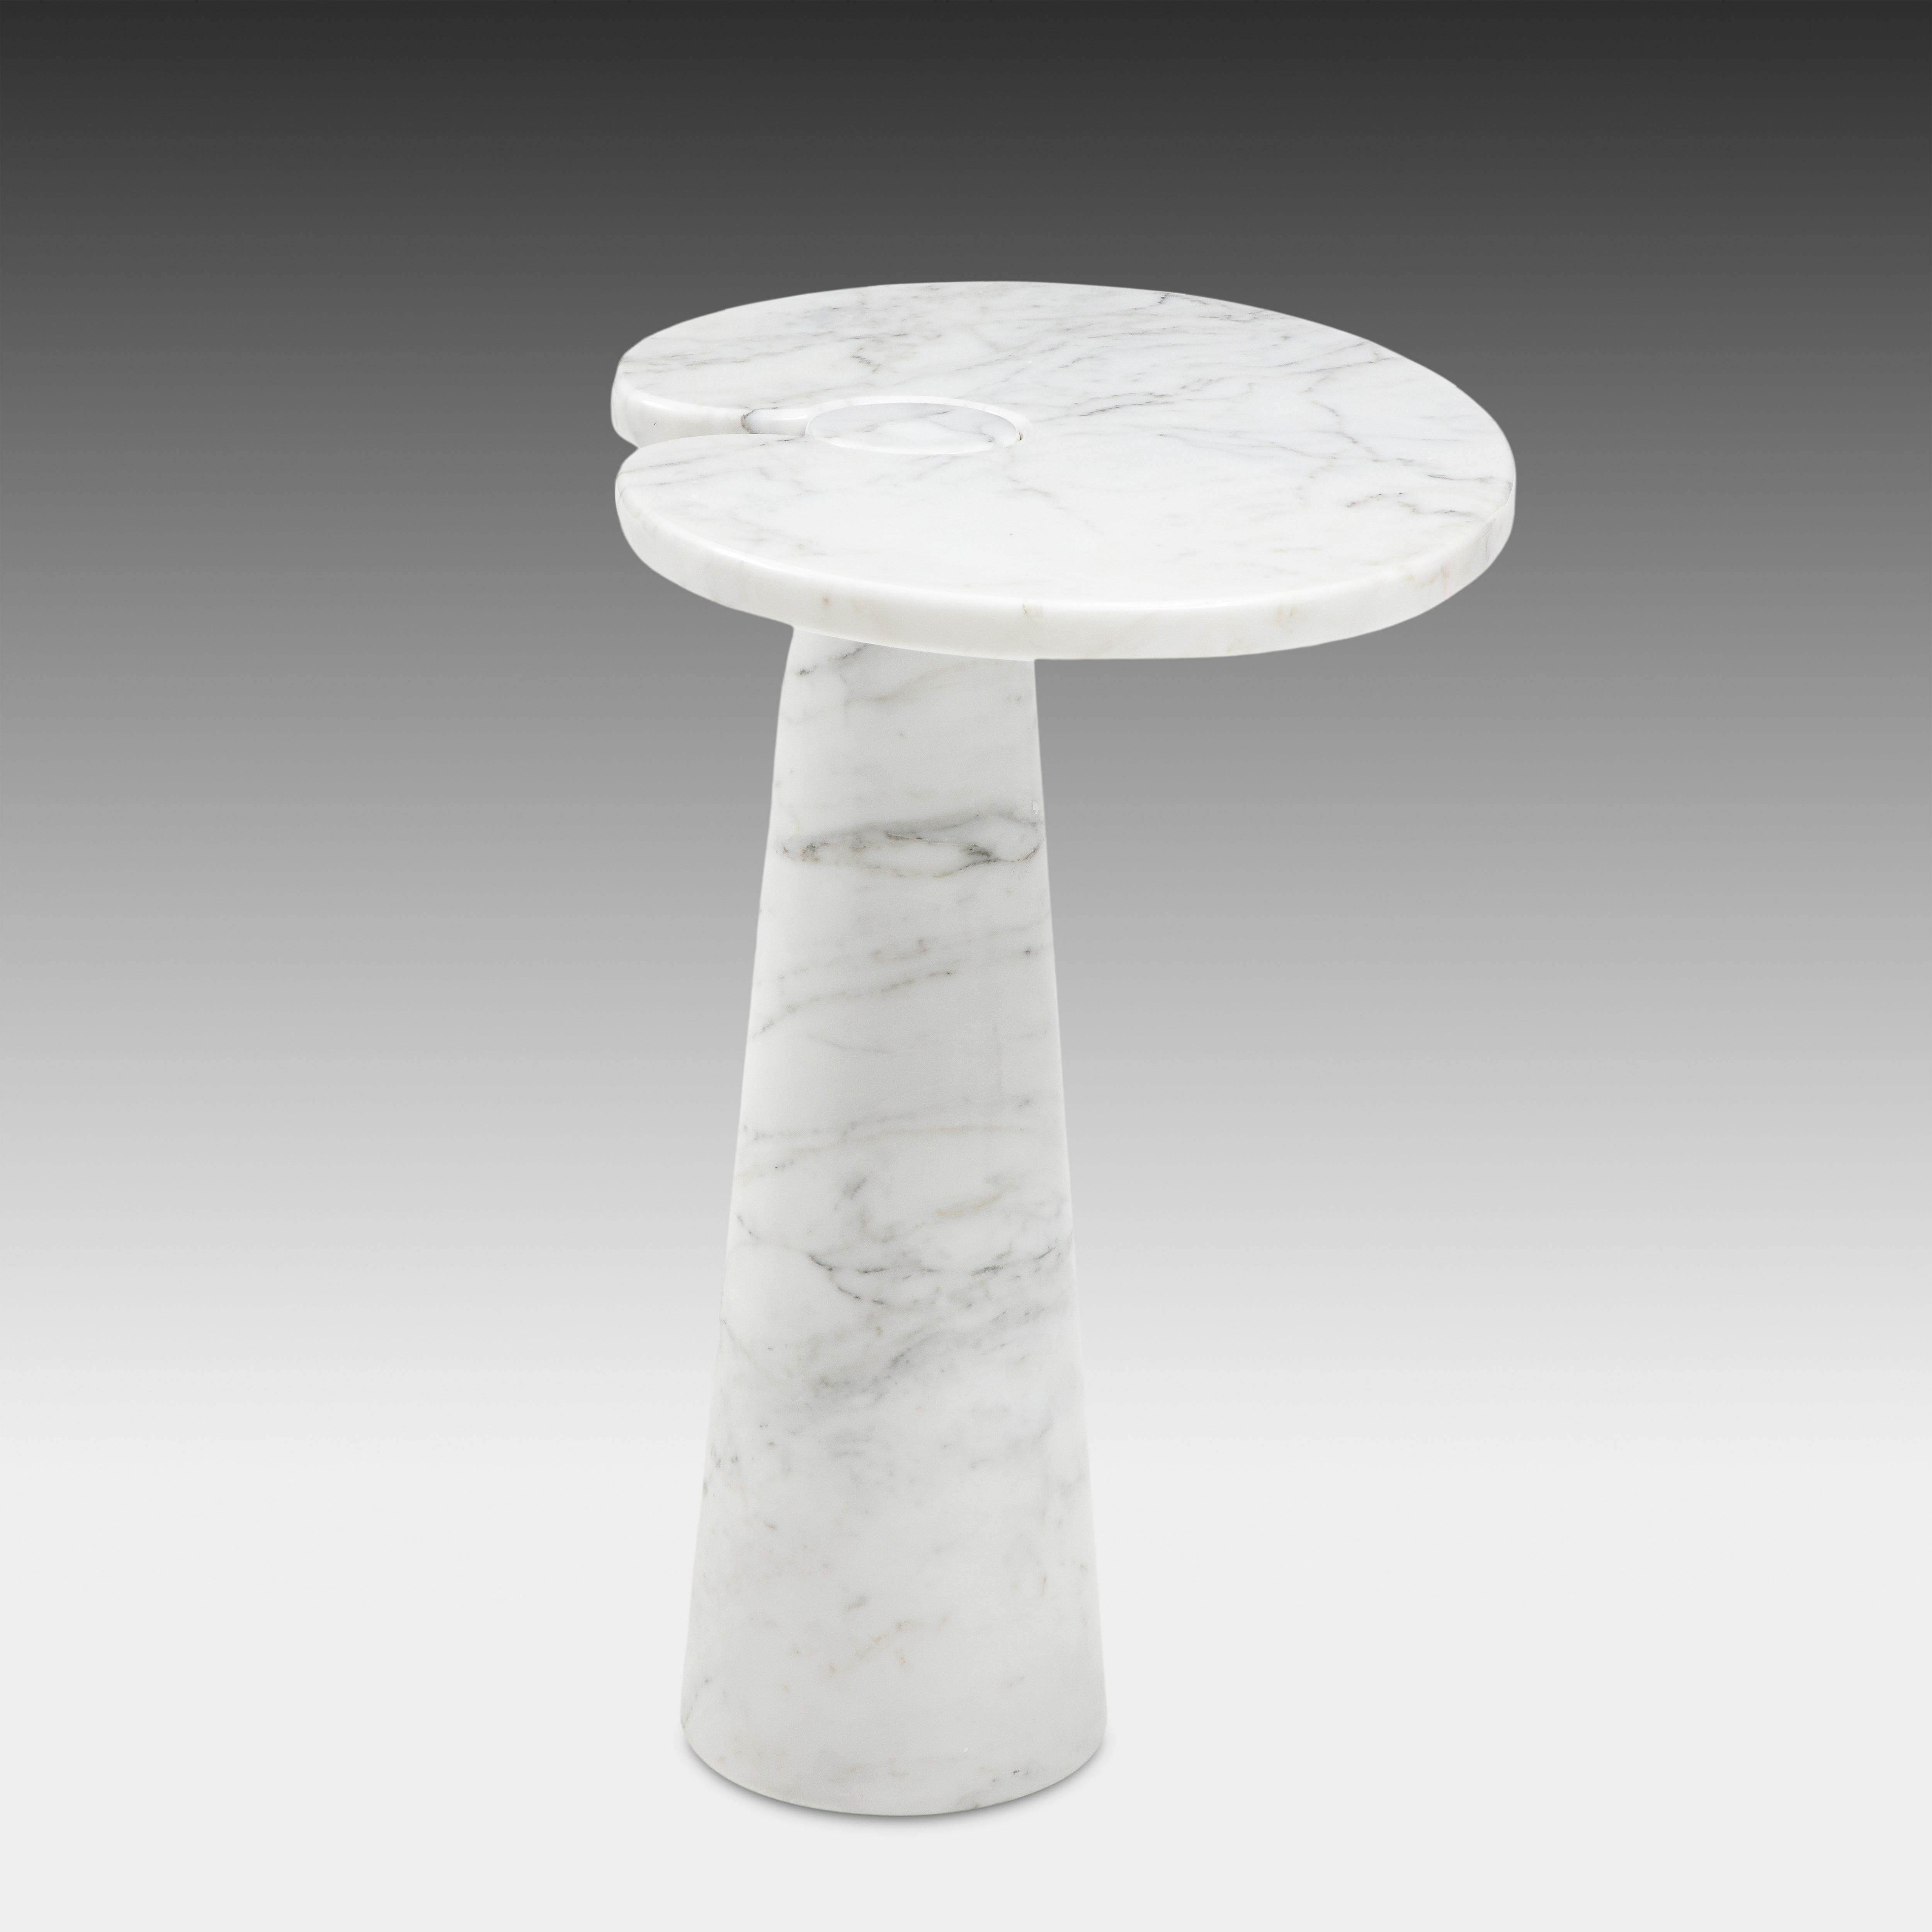 Mid-Century Modern Angelo Mangiarotti Carrara Marble Tall Side Table from Eros Series, 1971 For Sale